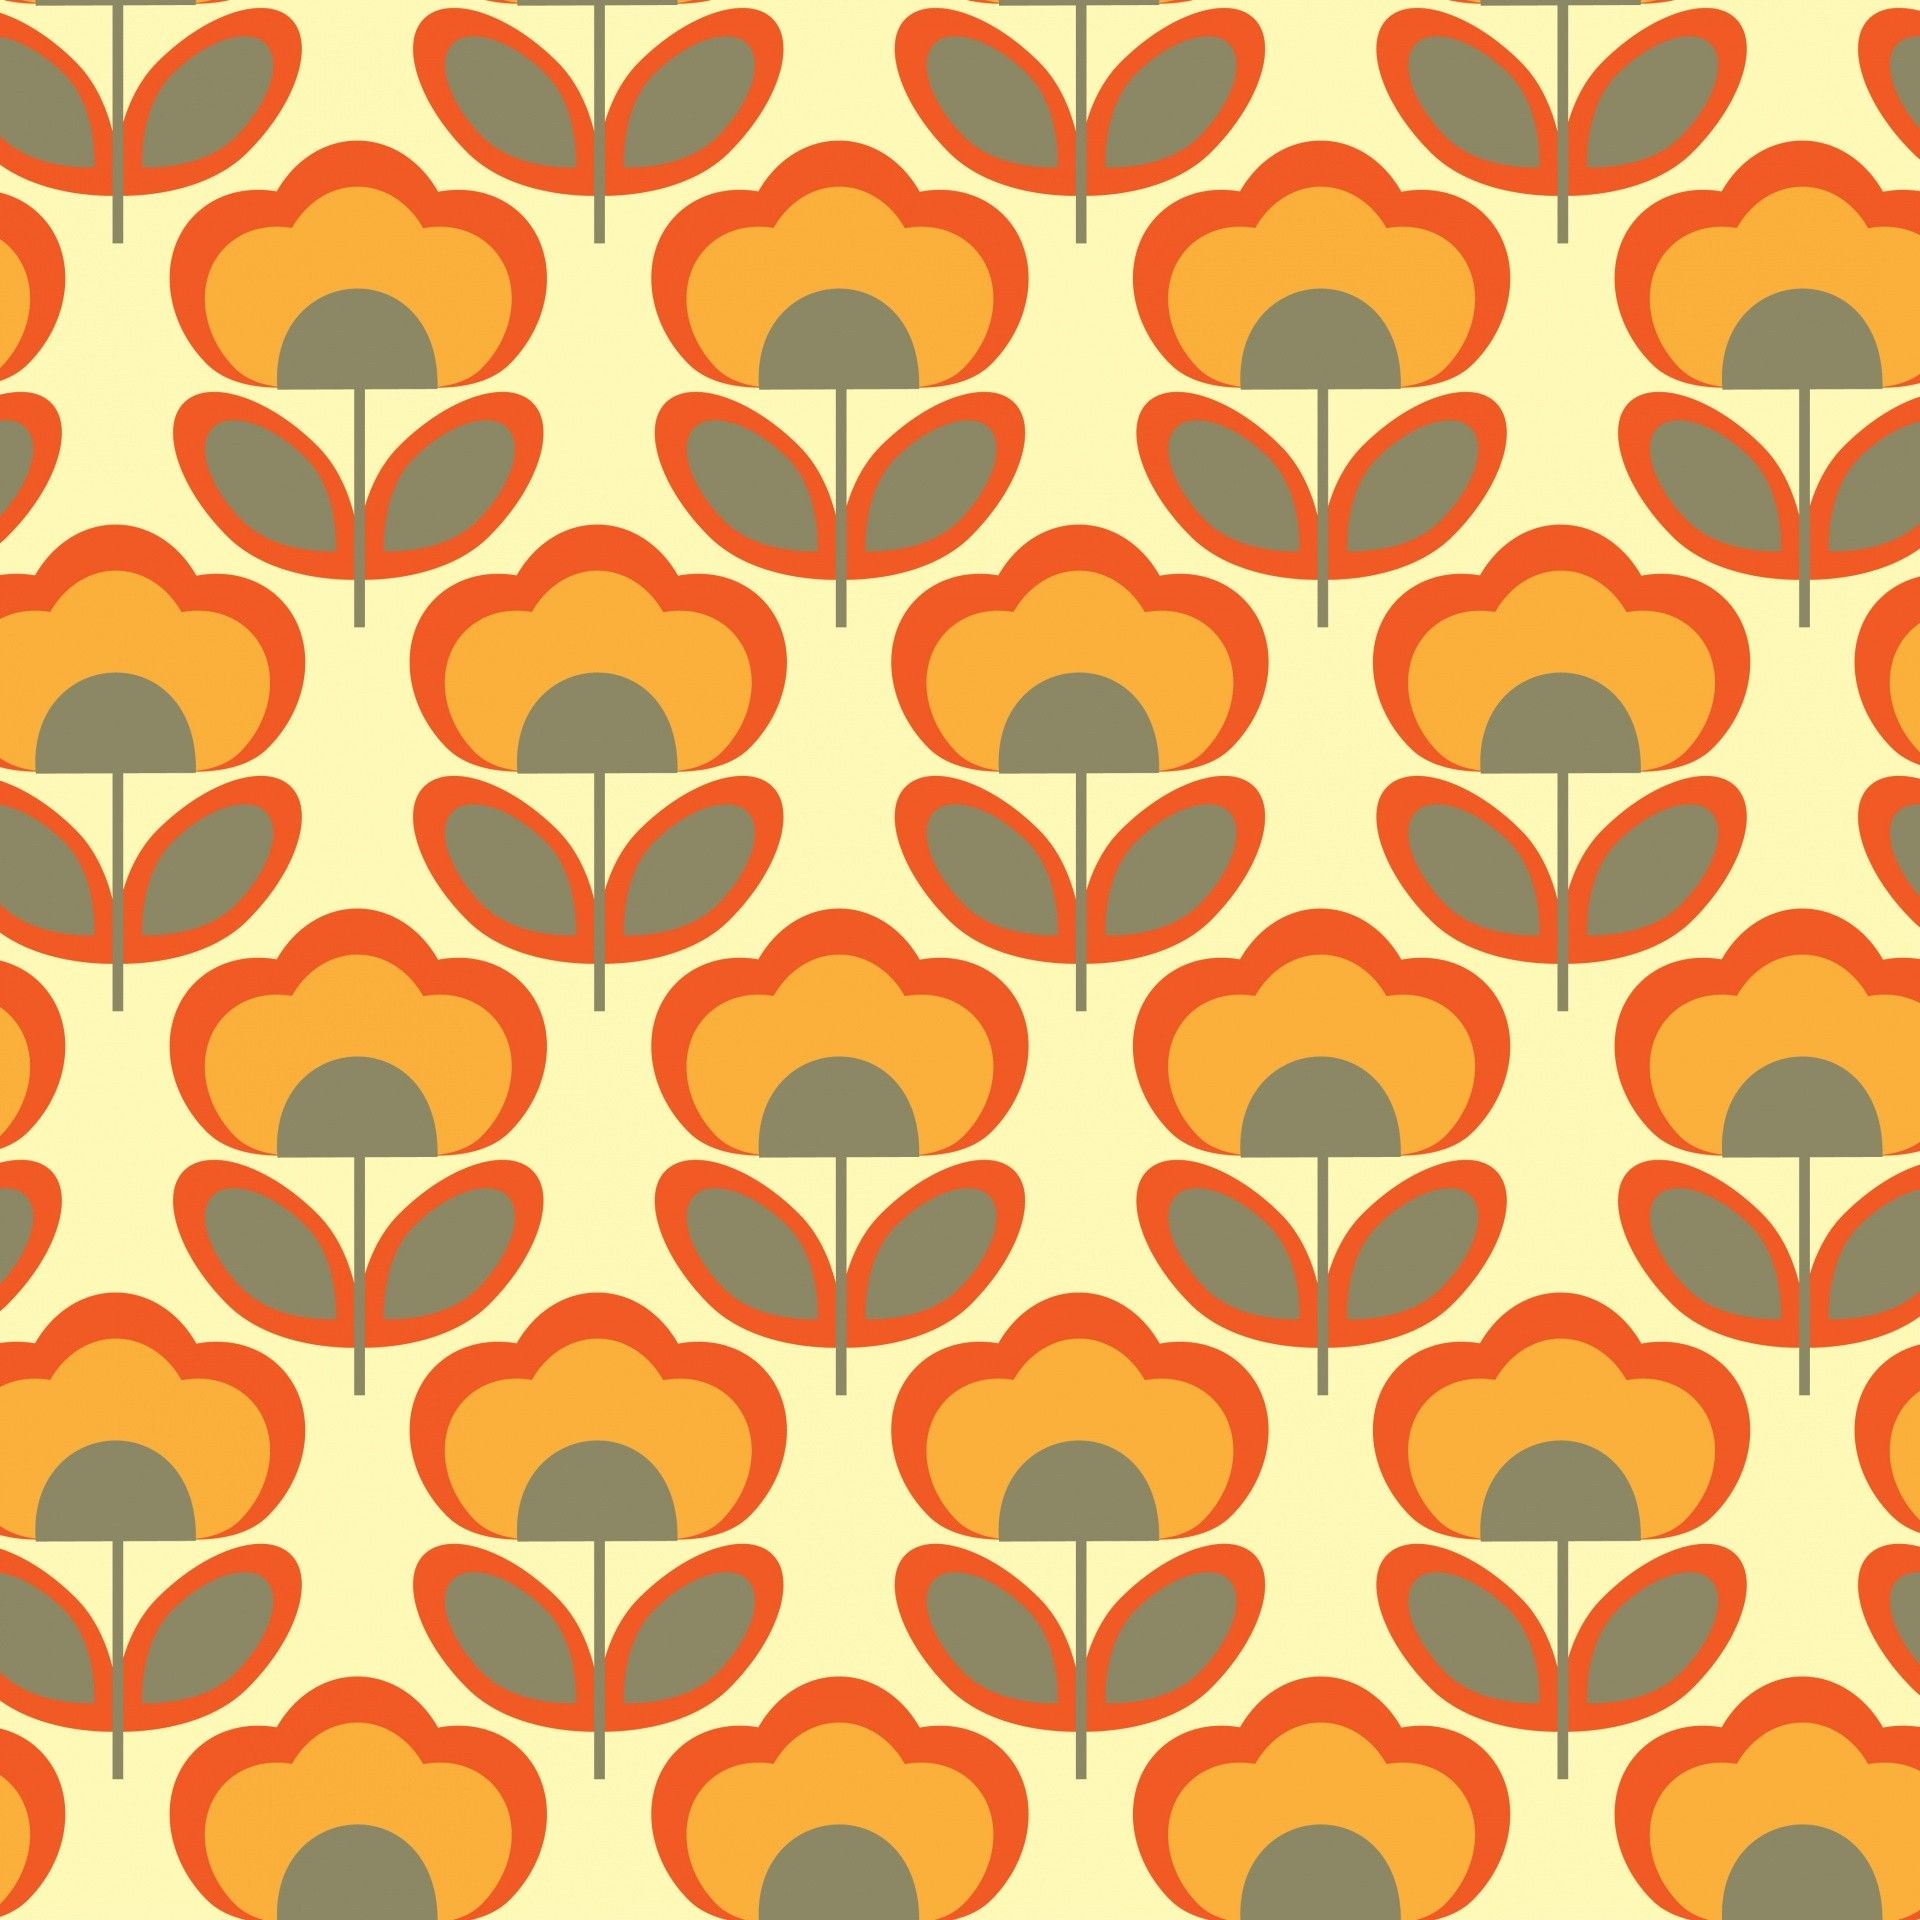 70s Wallpaper Free 70s Background